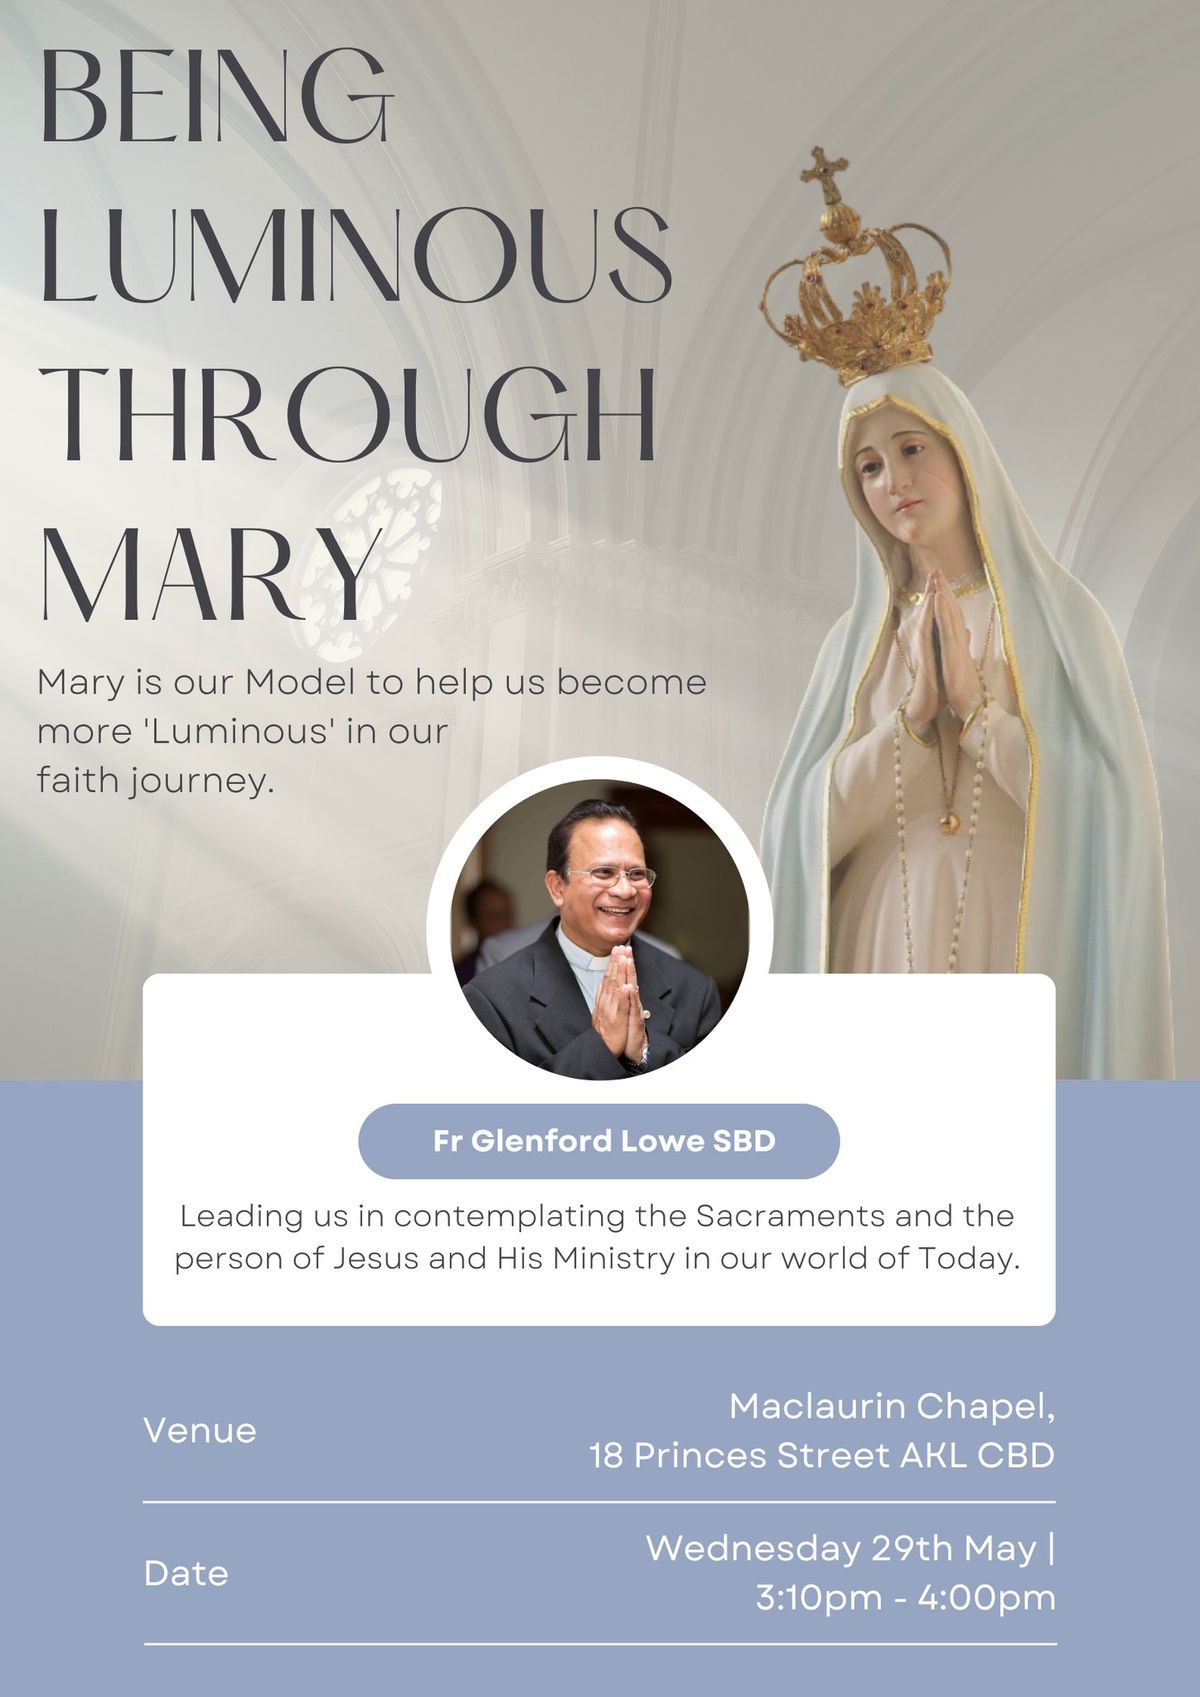 Being Luminous Through Mary with Fr Glen